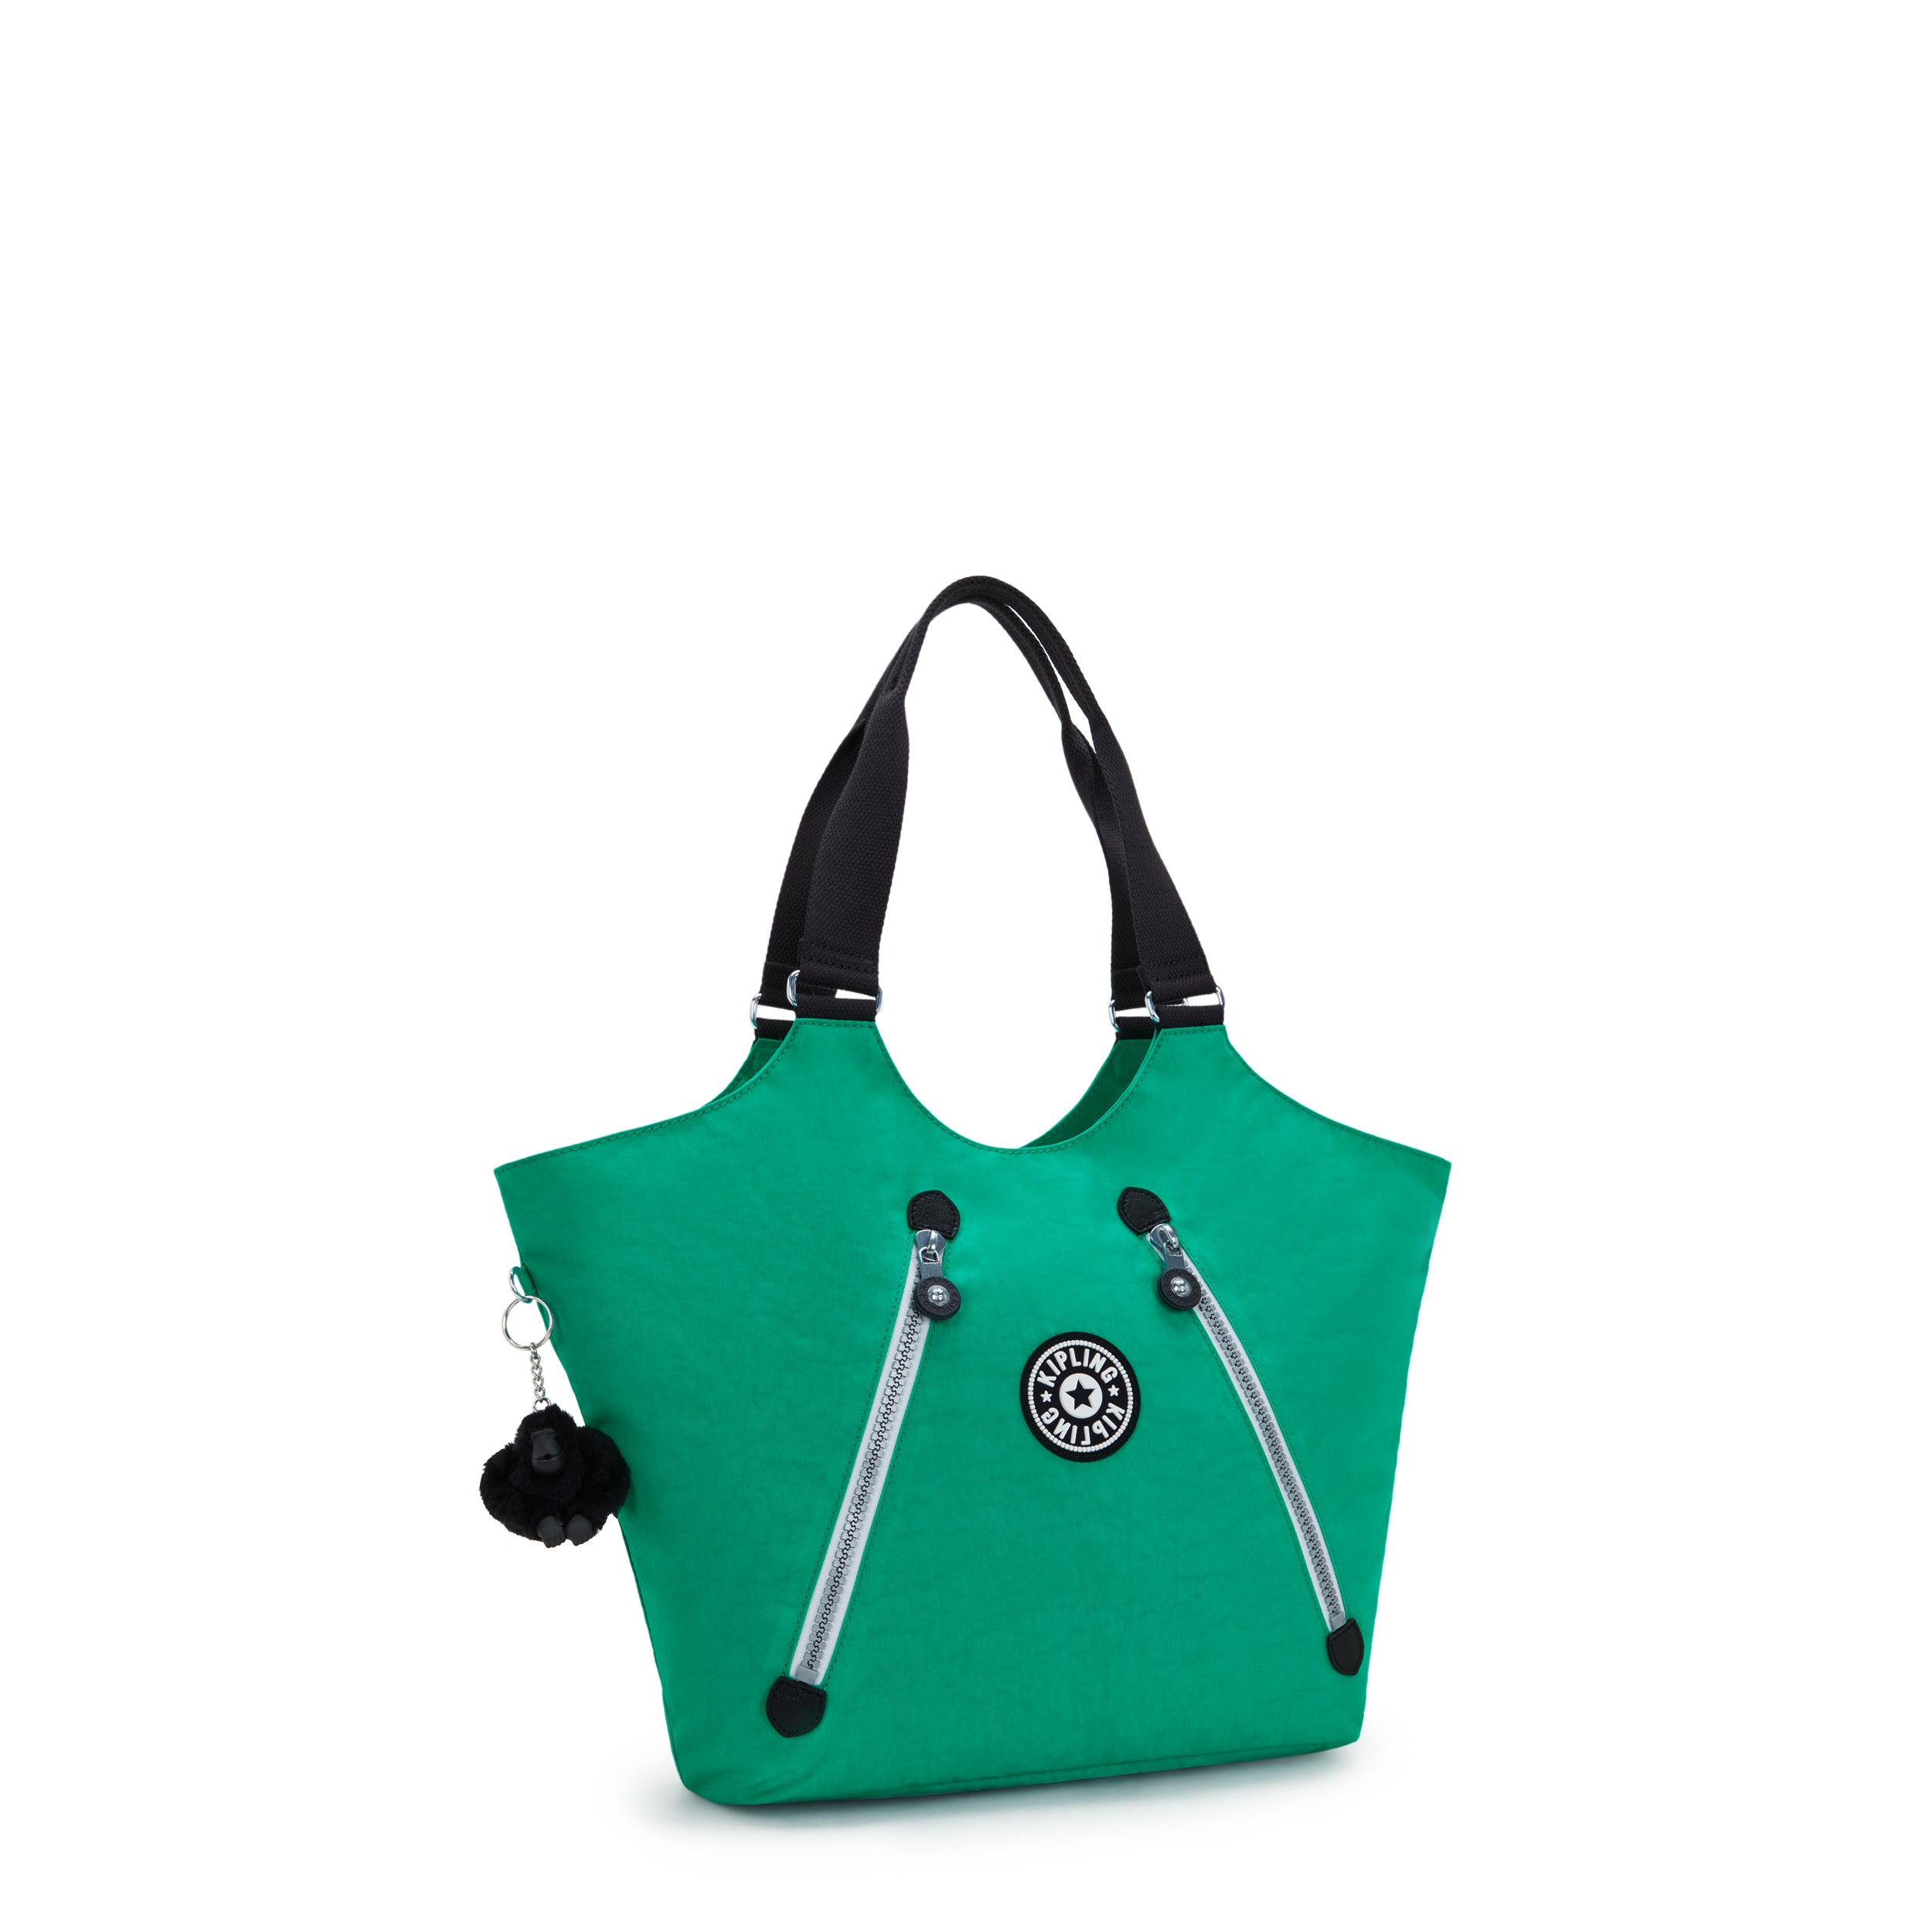 KIPLING-New Cicely-Medium Tote with Zipped Closure-Rapid Green-I2888-AG4